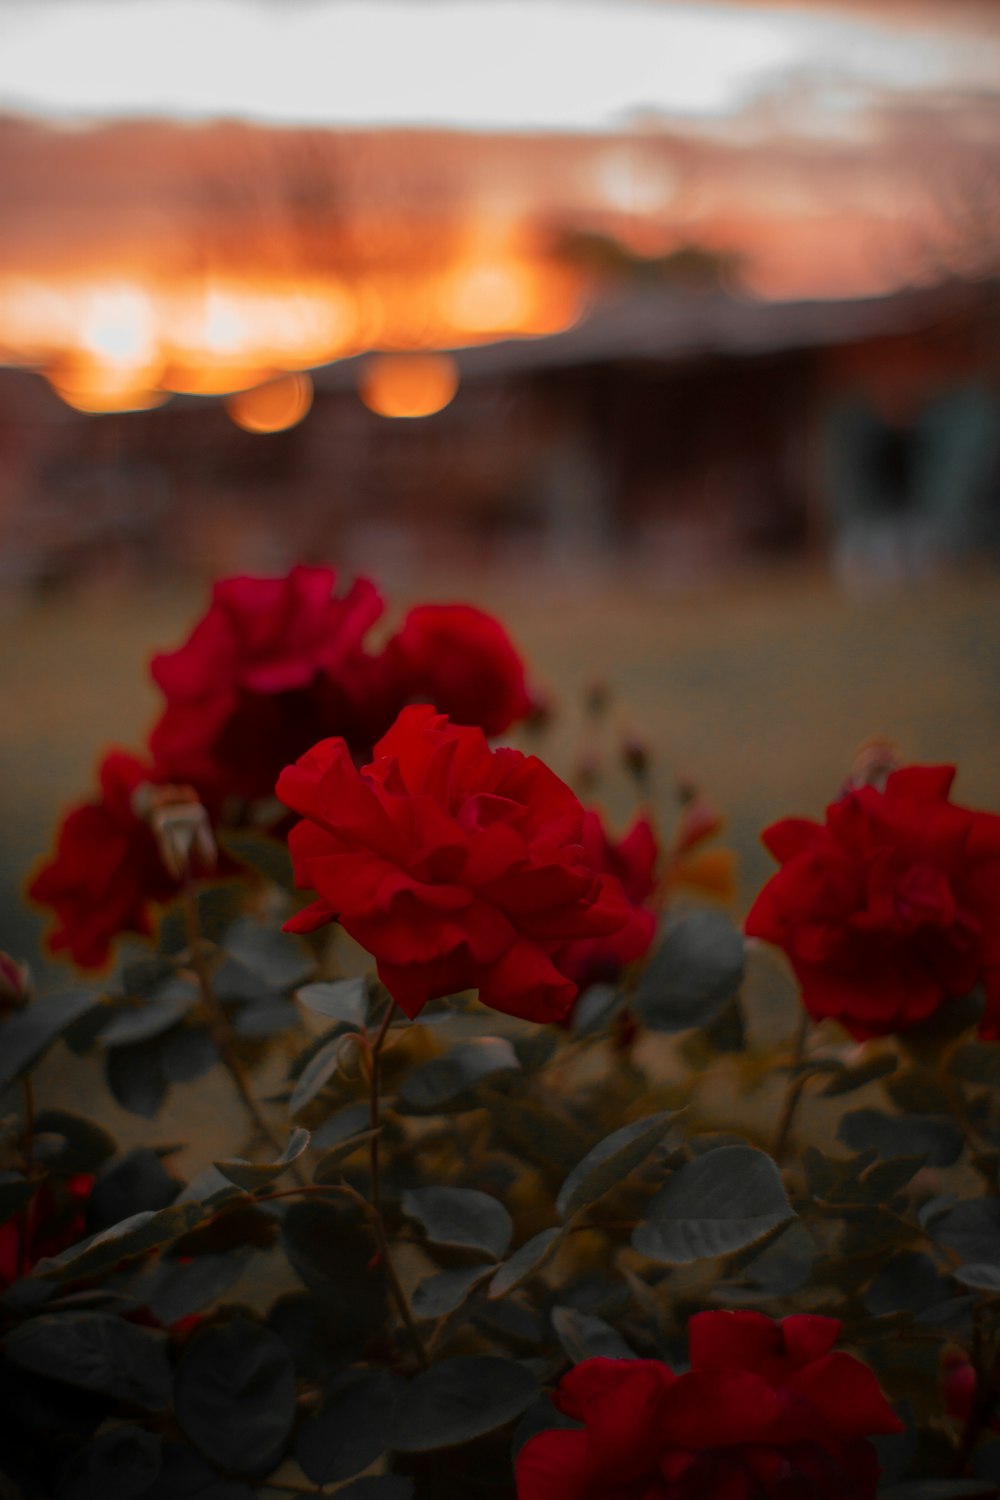 red flowers on brown soil during sunset